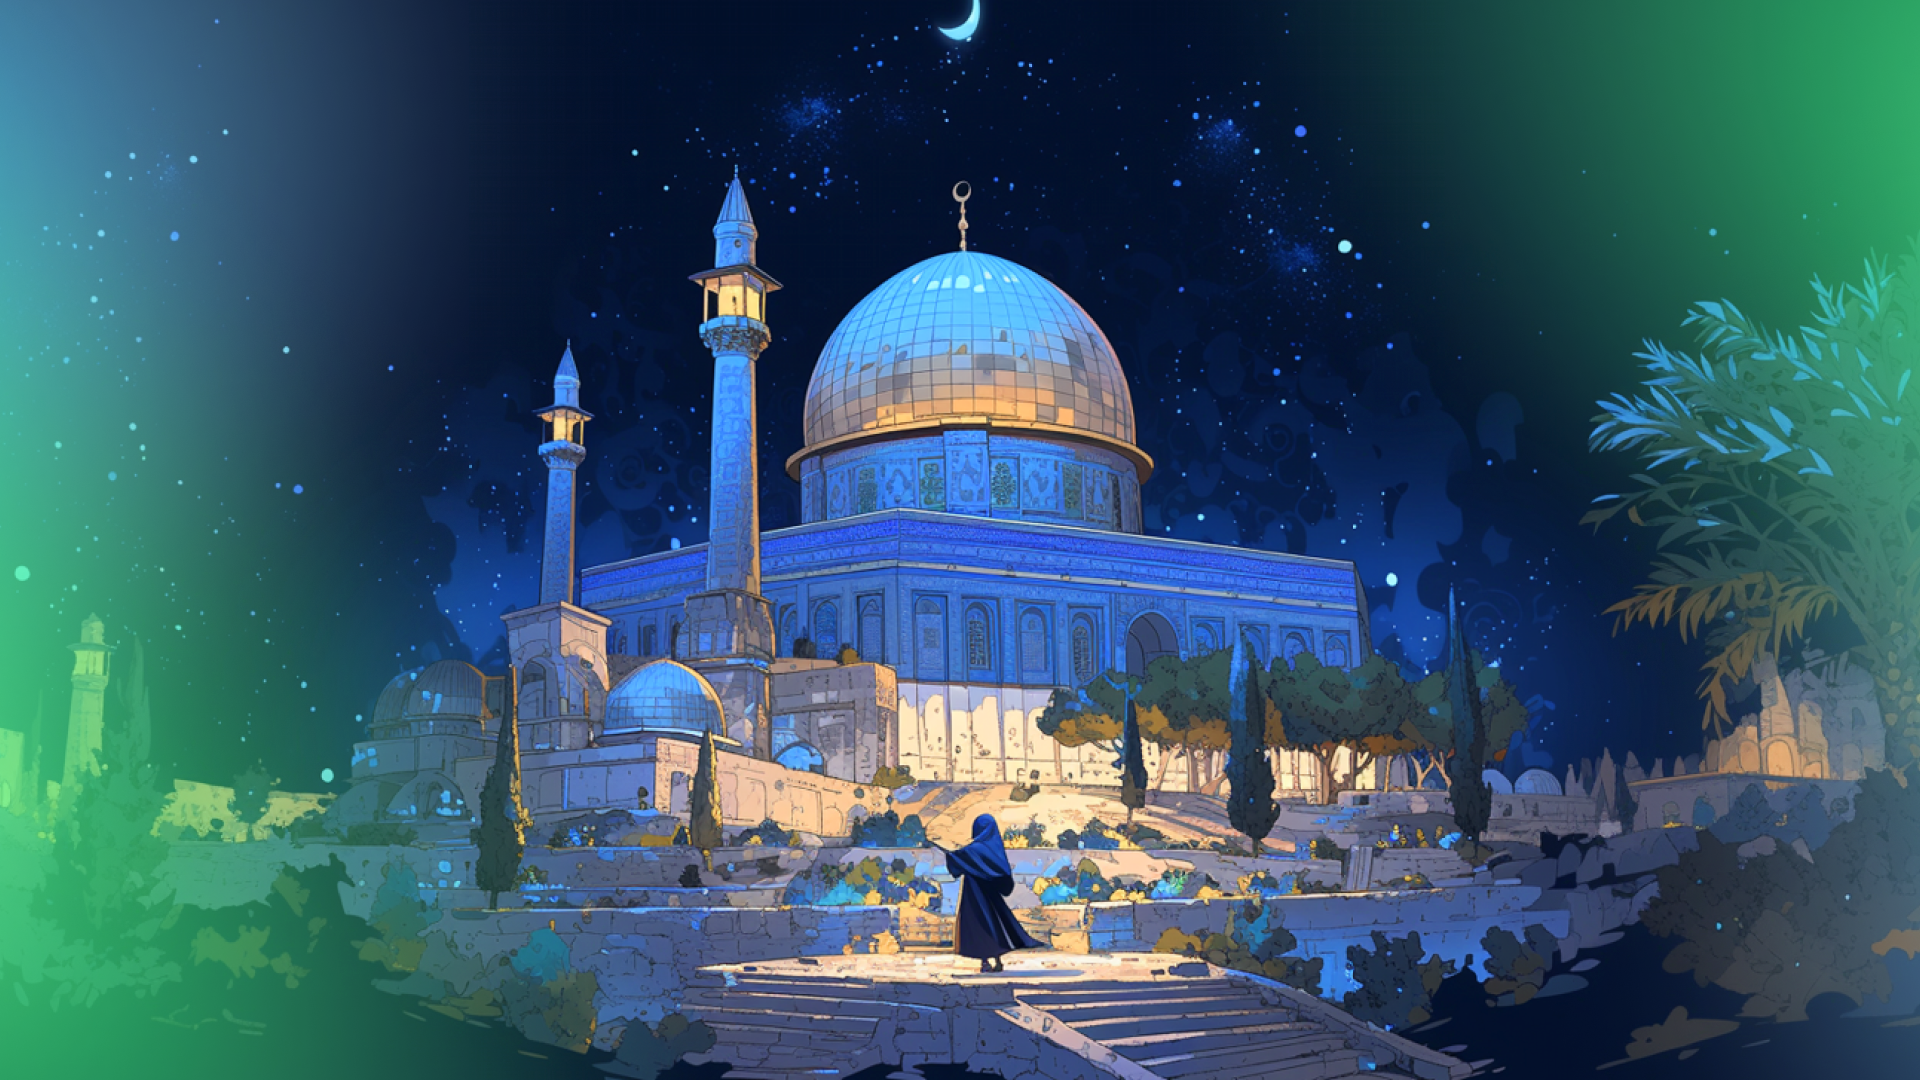 A graphic of a Al-Aqsa mosque with a little girl standing in front of it